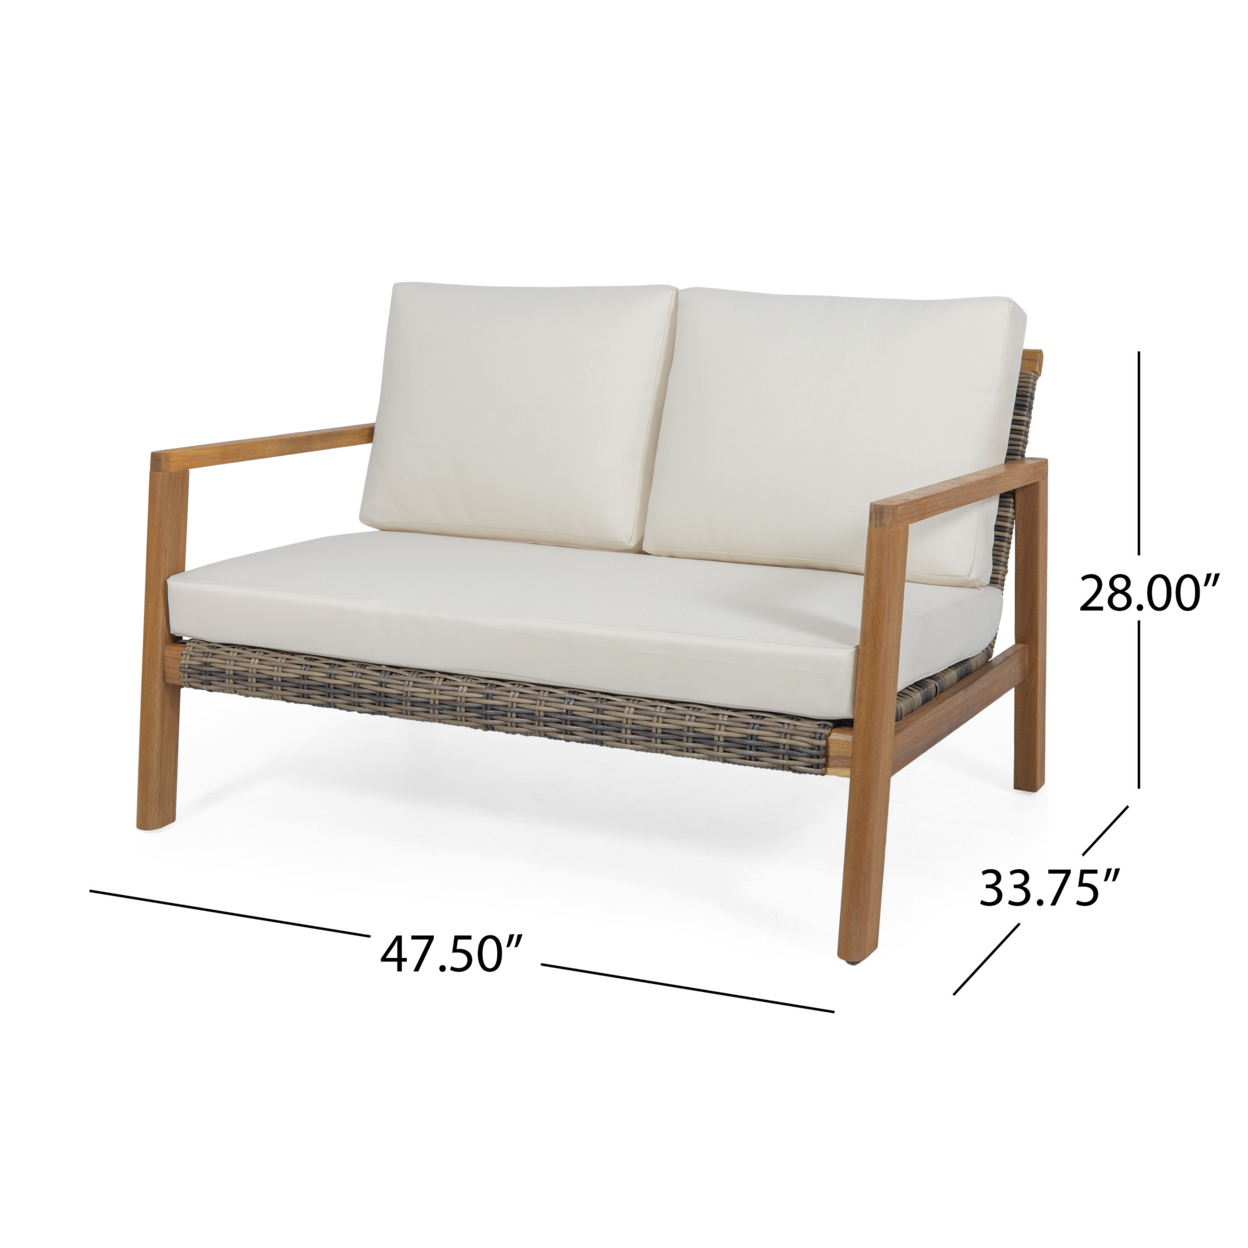 Kedan Outdoor Acacia Wood Loveseat With Wicker Accents